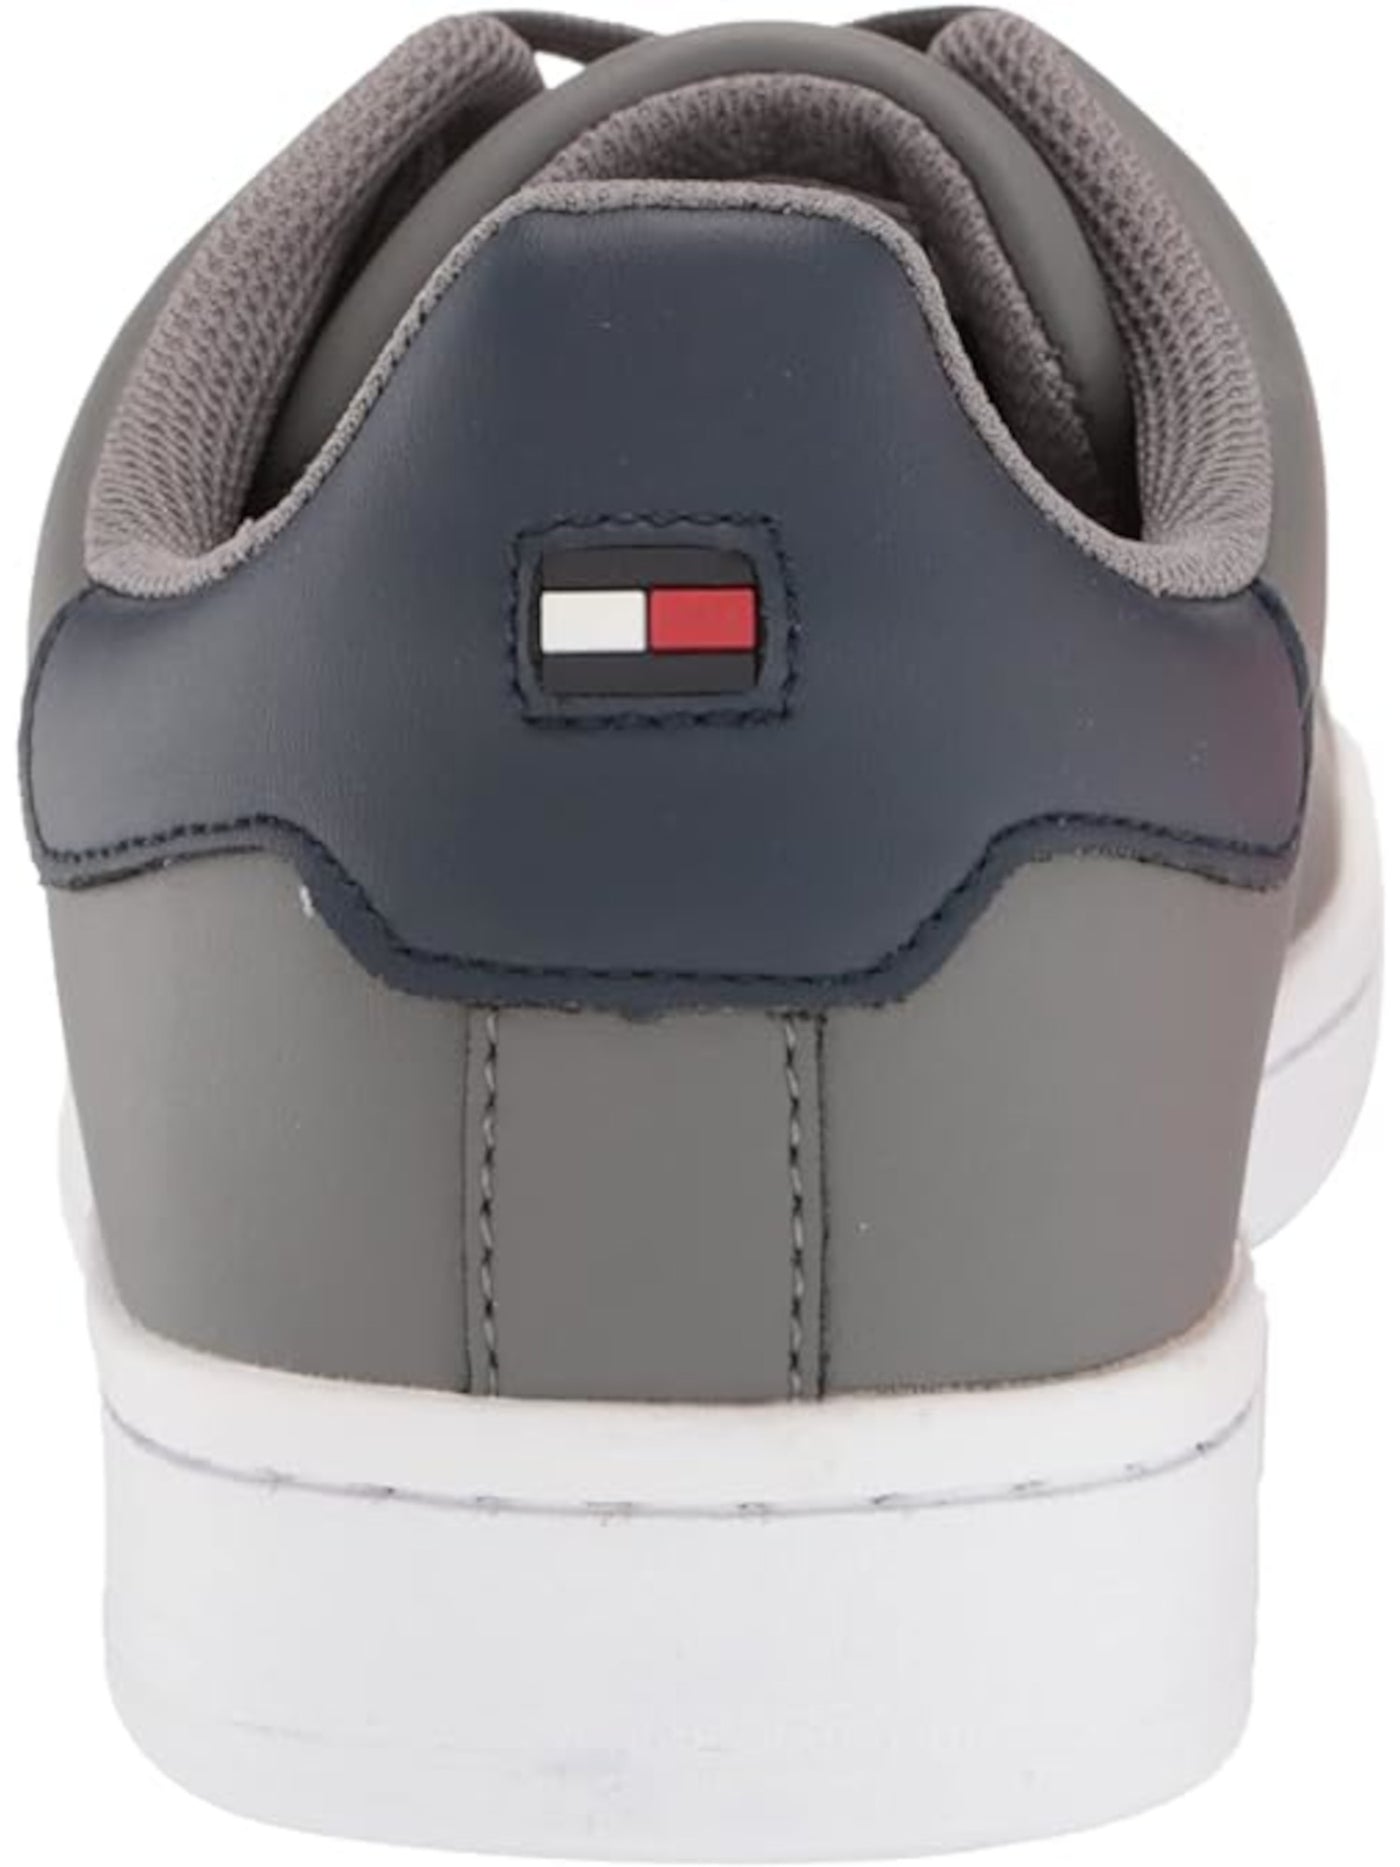 TOMMY HILFIGER Mens Gray Removable Insole Logo Lampkin Round Toe Platform Lace-Up Sneakers Shoes 8